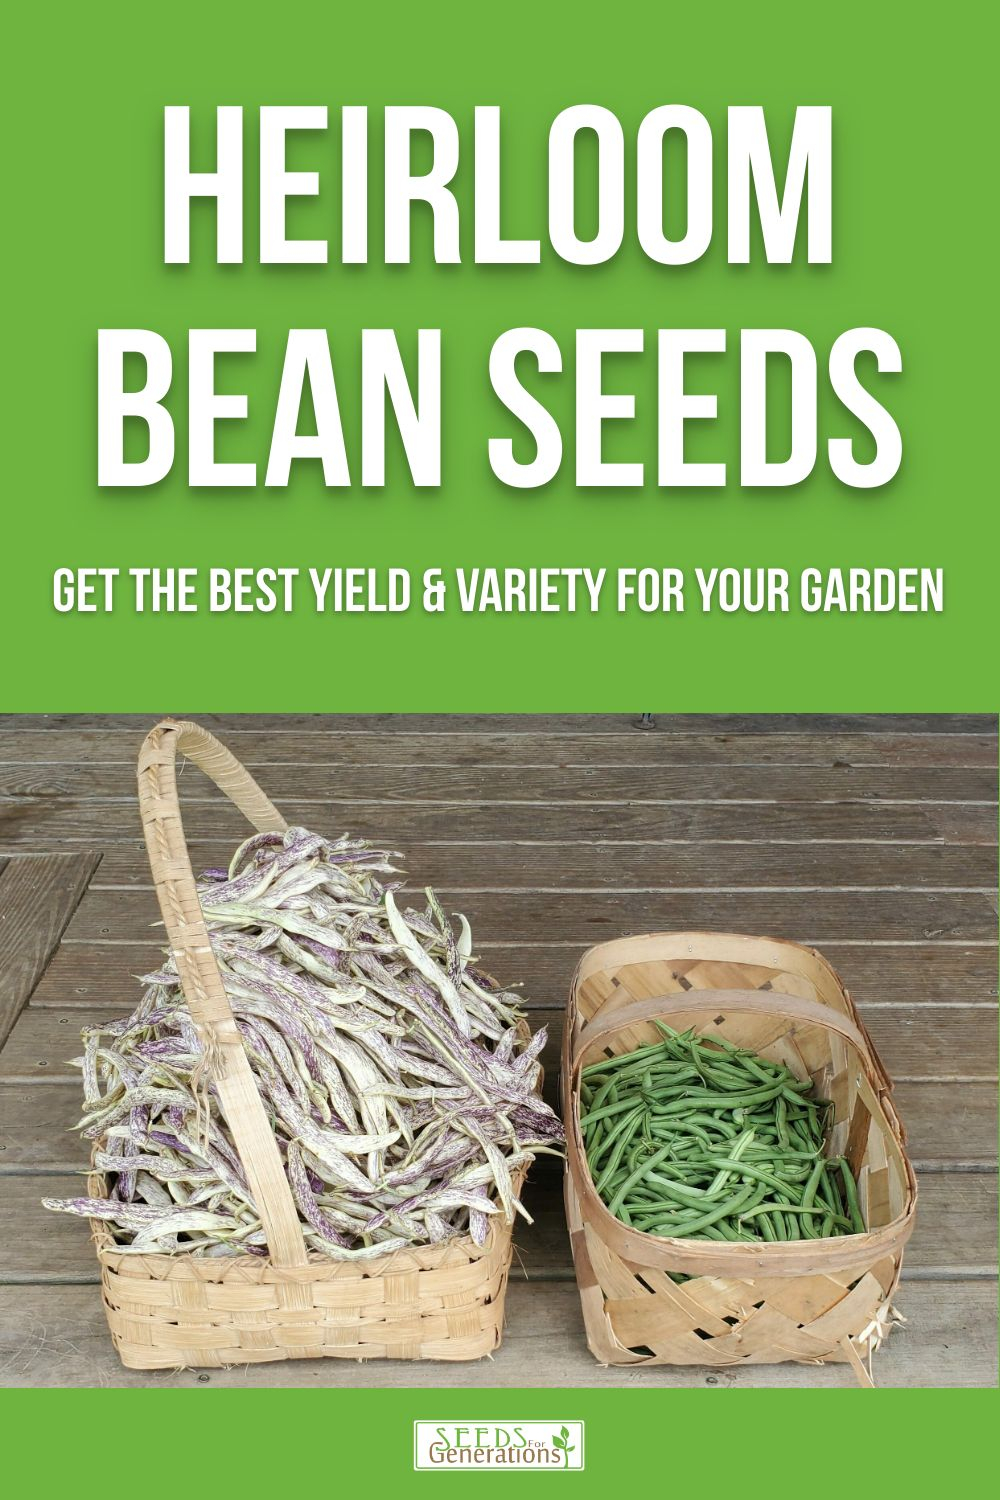 Heirloom Bean Seeds to get the best yield and variety for your garden! 